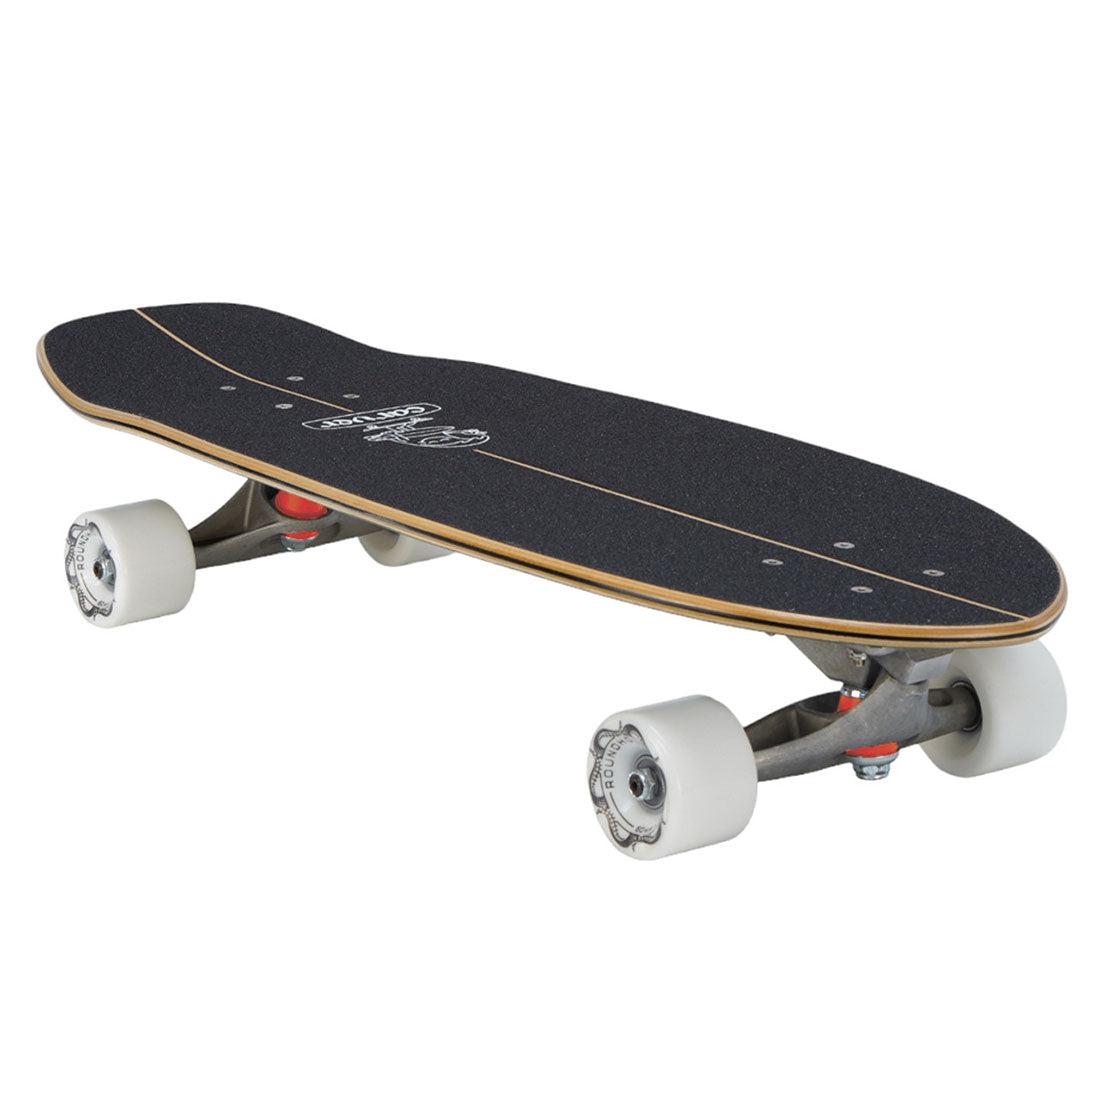 Carver Snake Bite 27 C5 Mini Complete Skateboard Compl Carving and Specialty